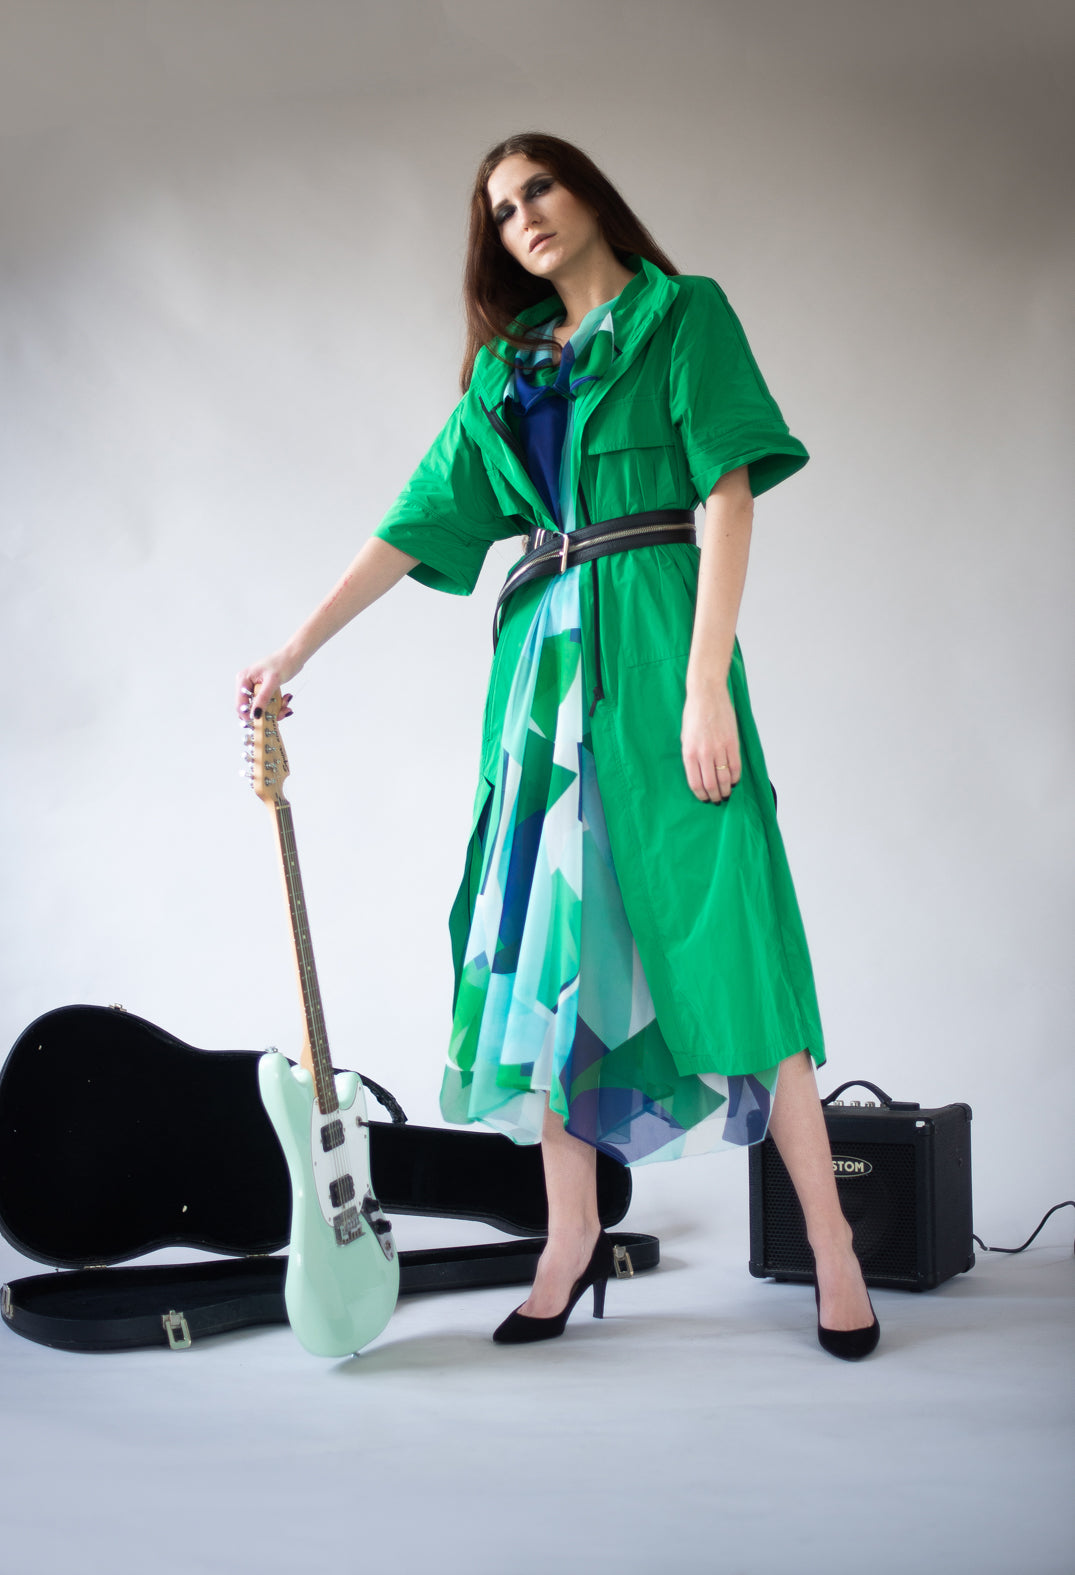 Kama Trench in Bright Green